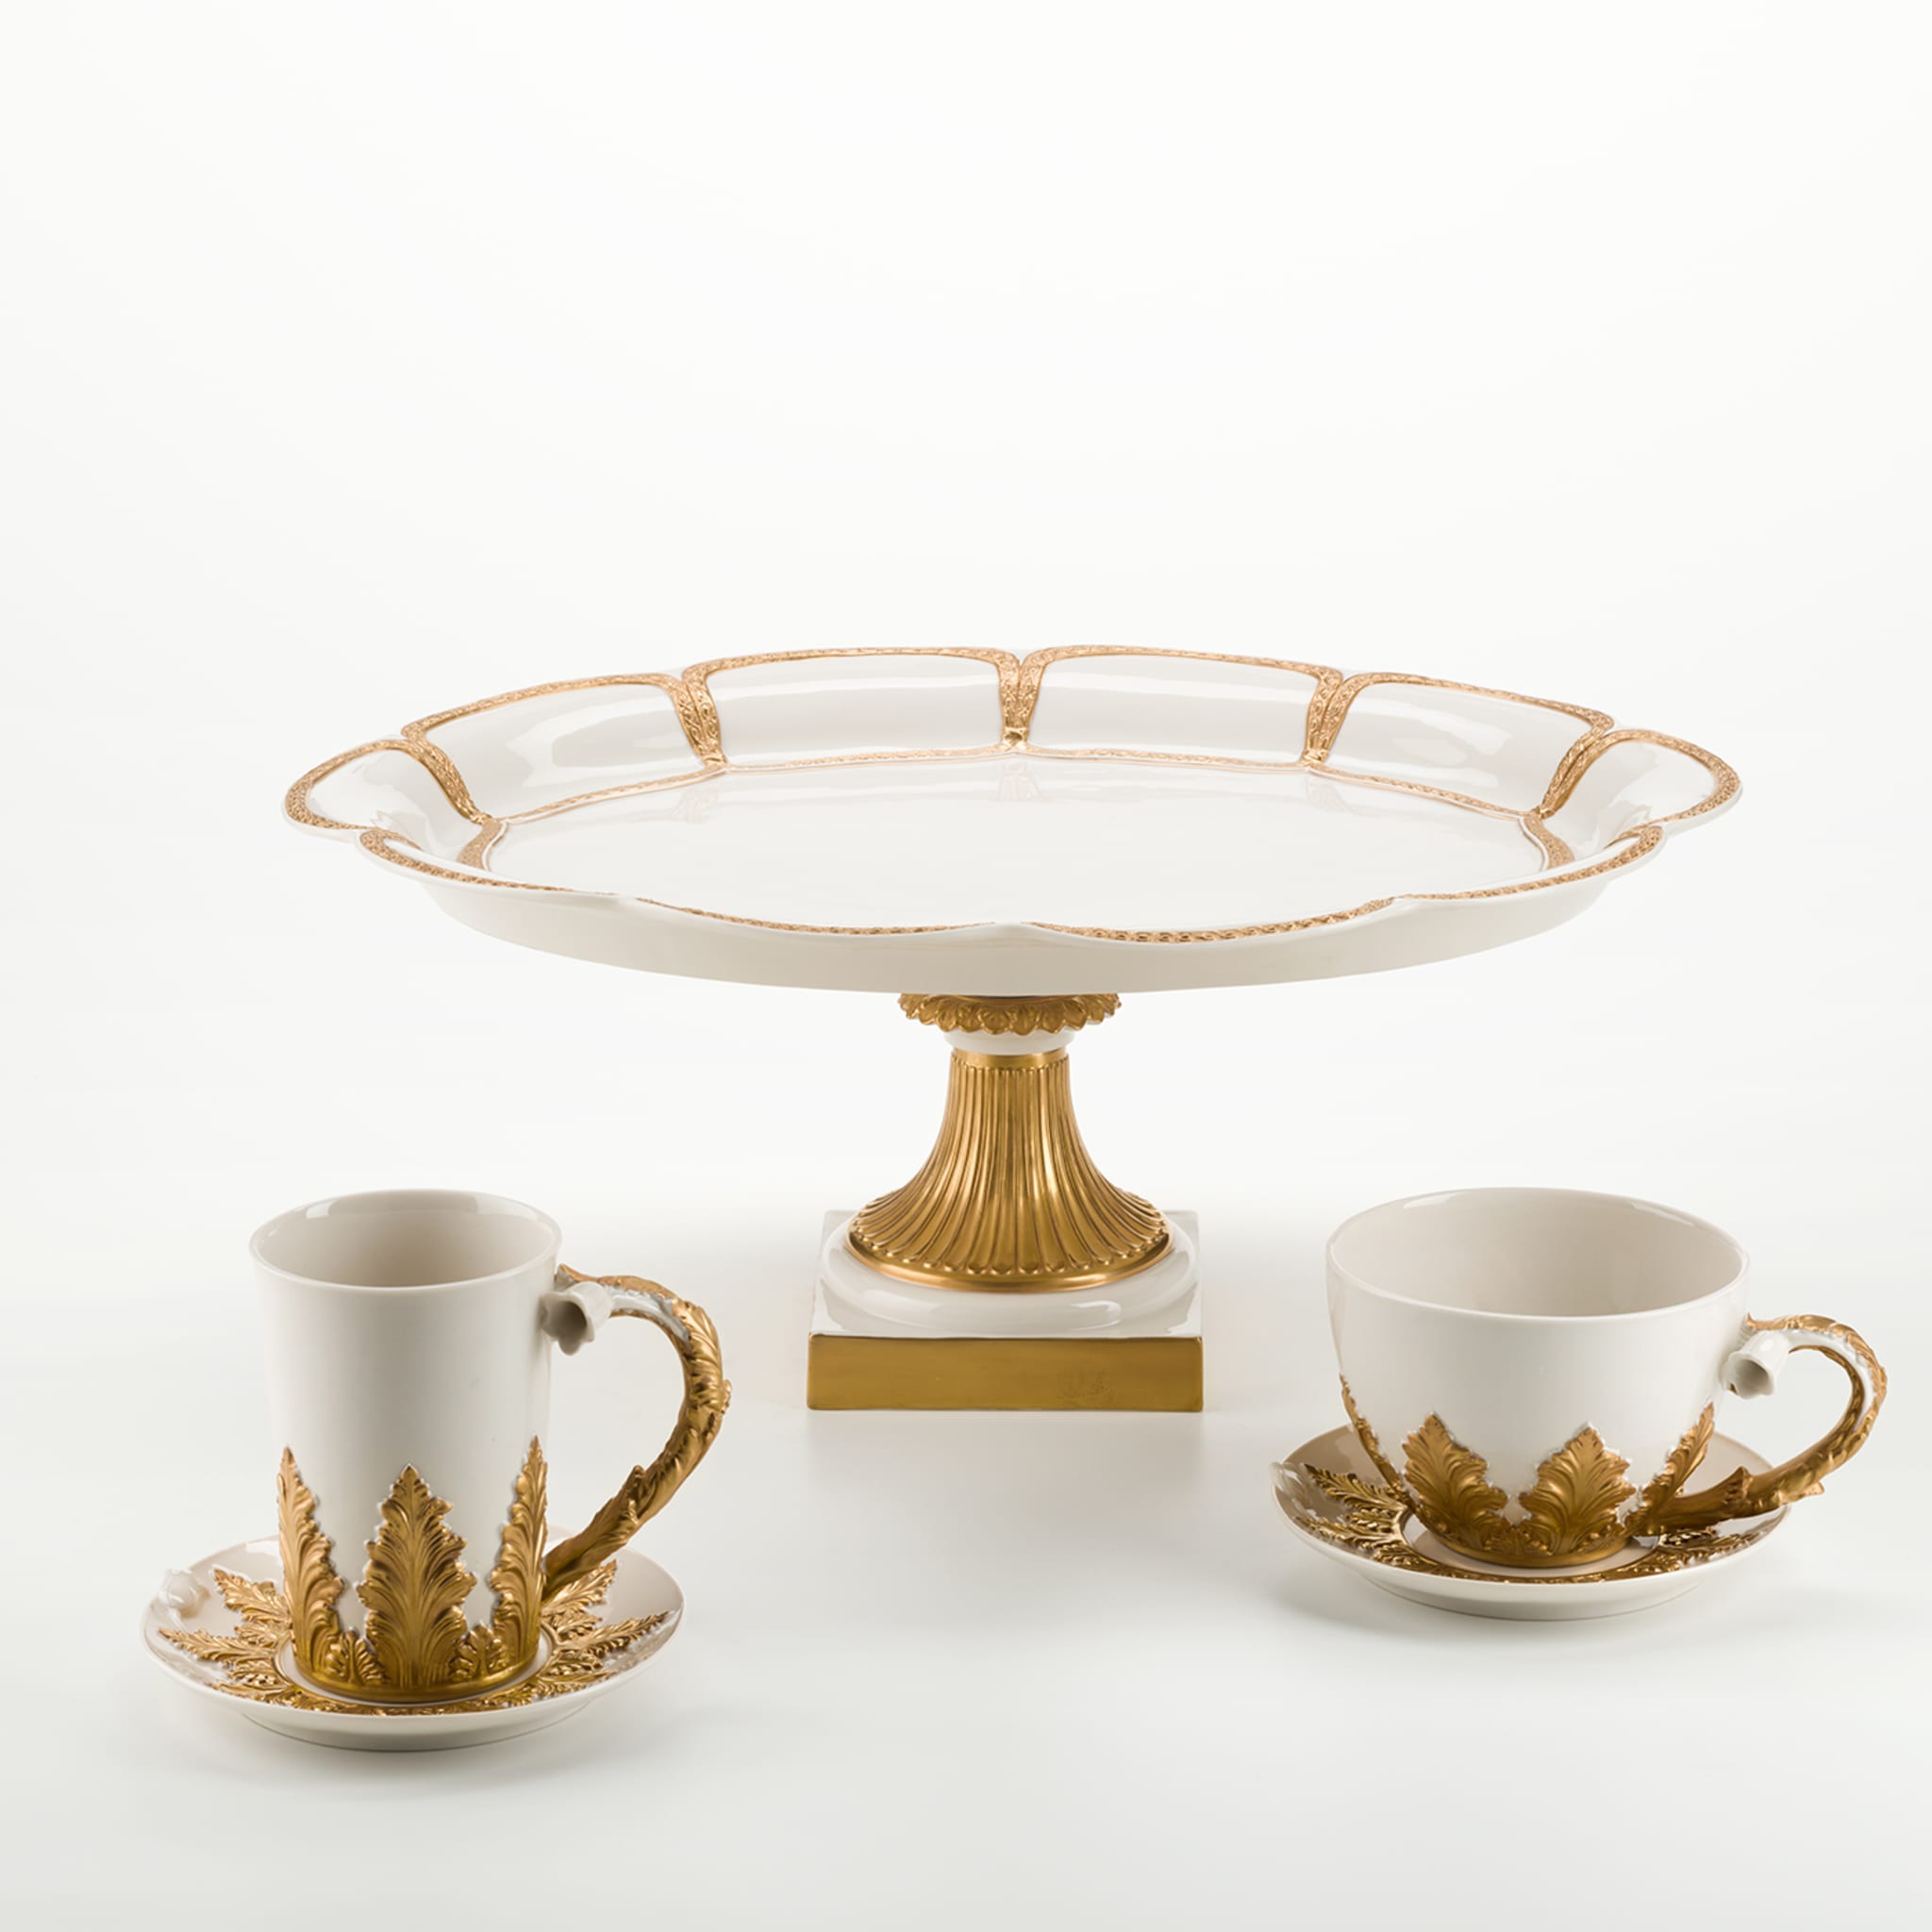 Gold Leaves Tea Cup & Saucer  - Alternative view 1